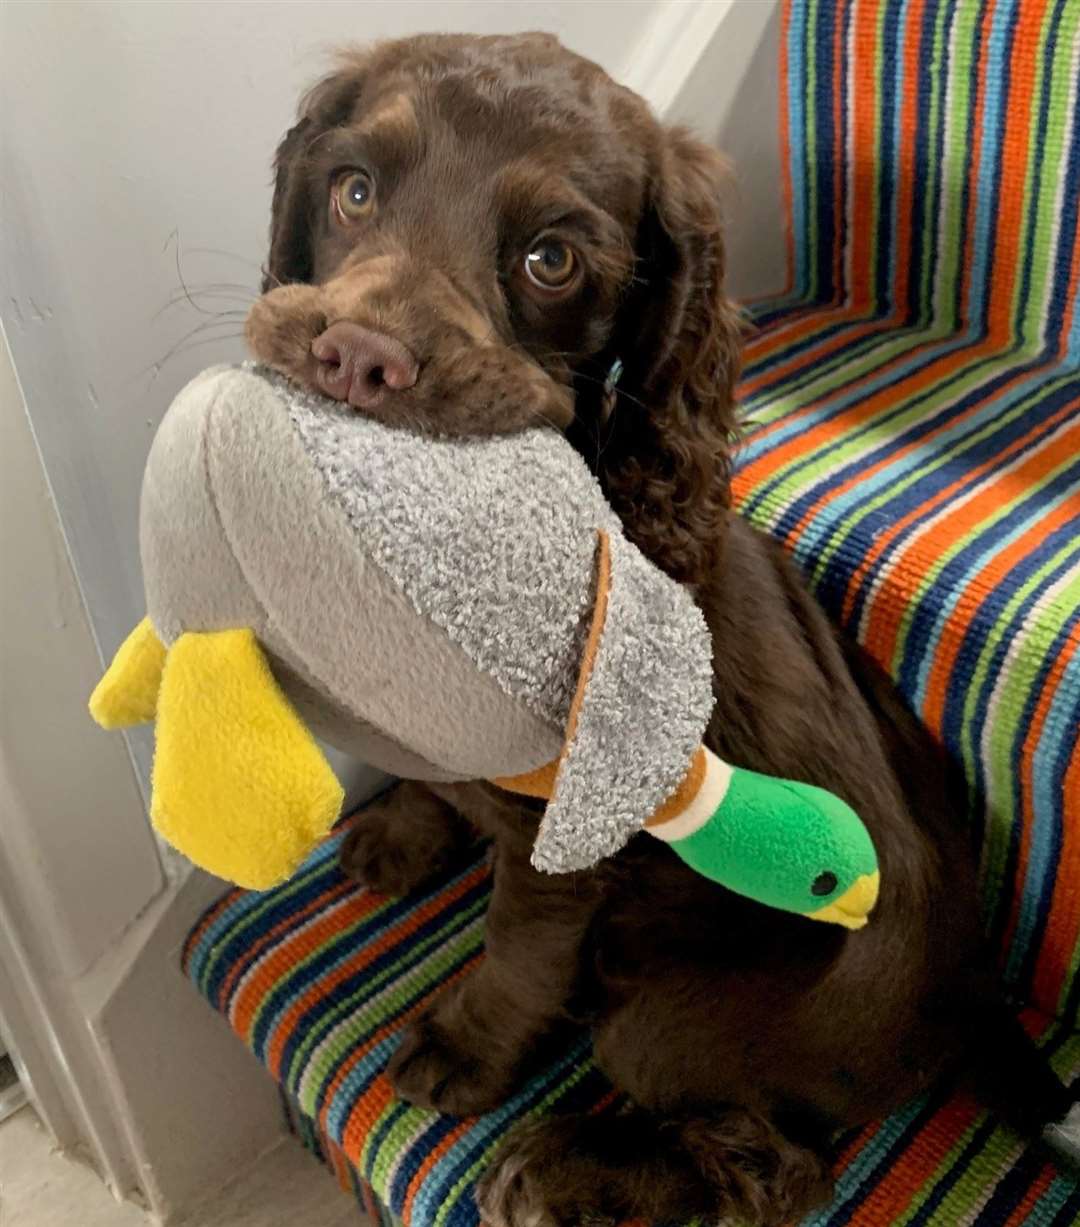 Orla with her cuddly duck